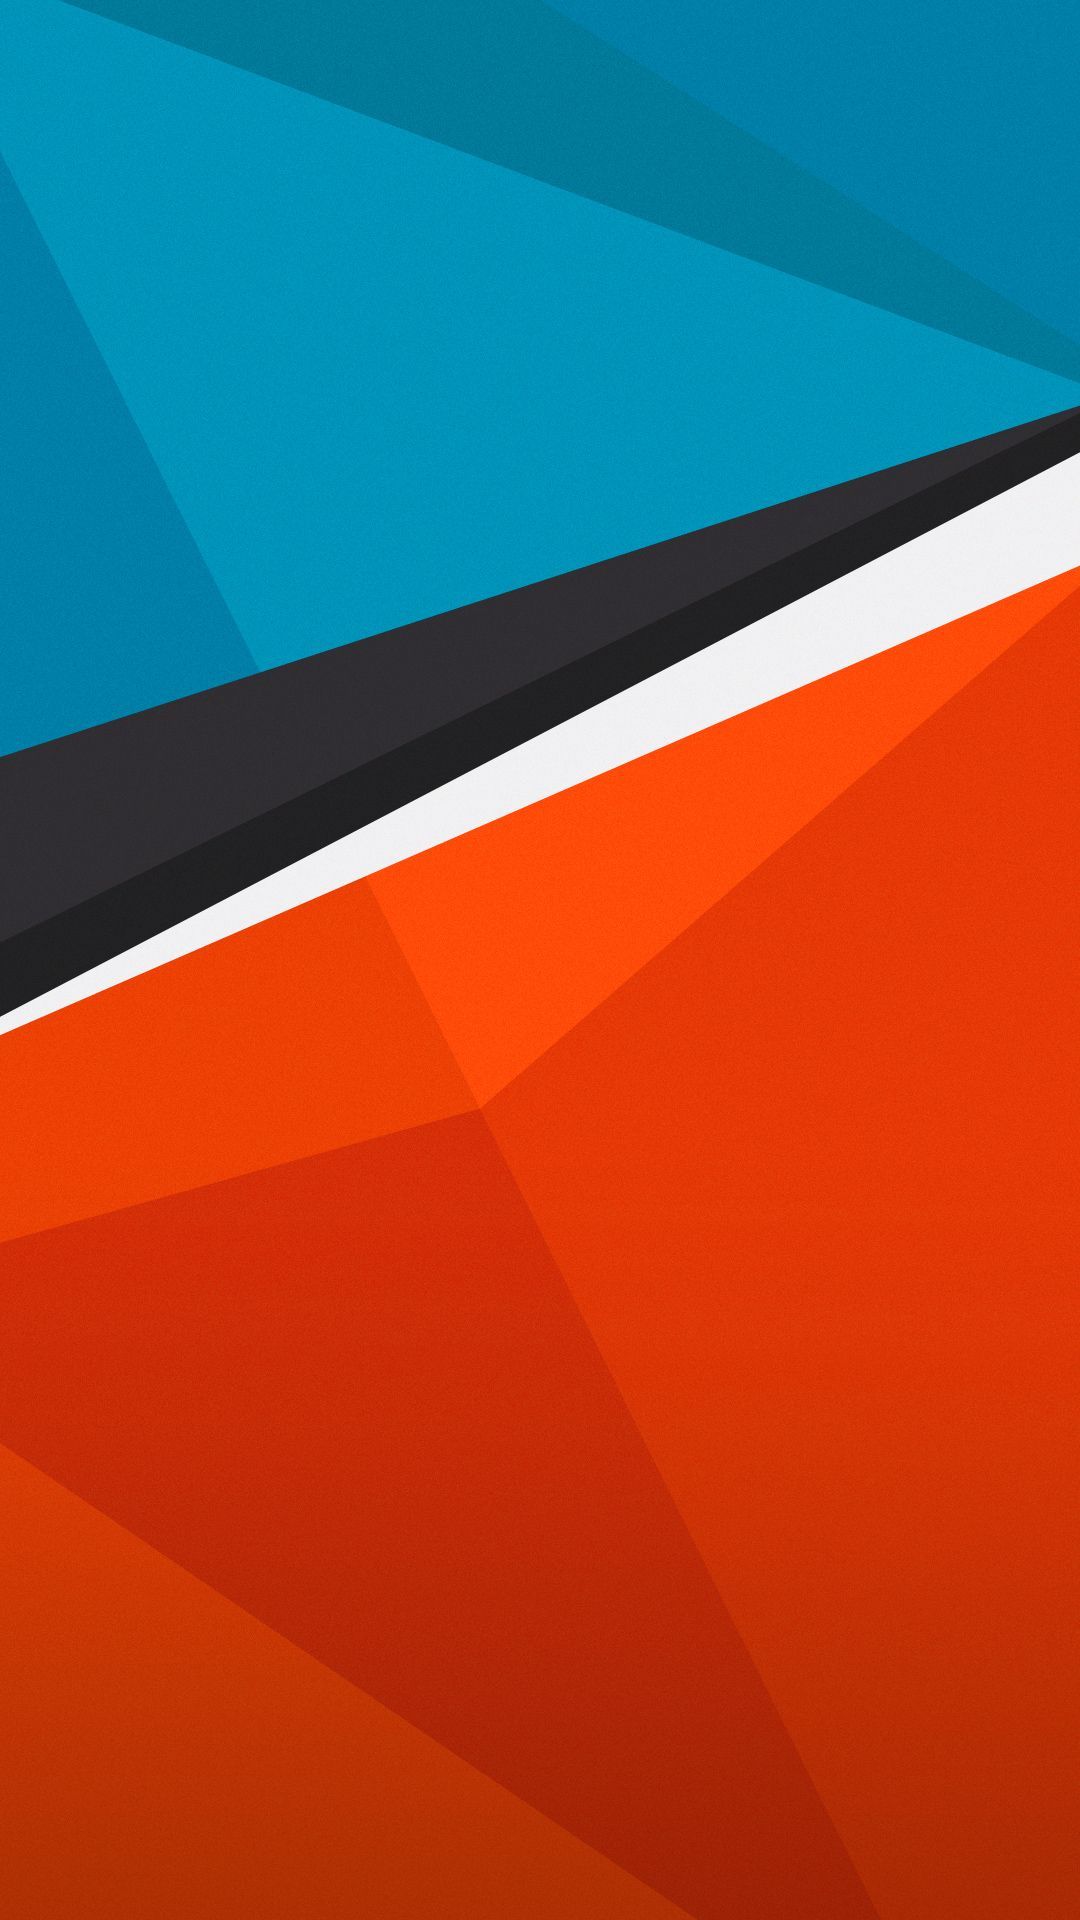 Simple Wallpaper For Phone - Abstract Orange And Blue - HD Wallpaper 